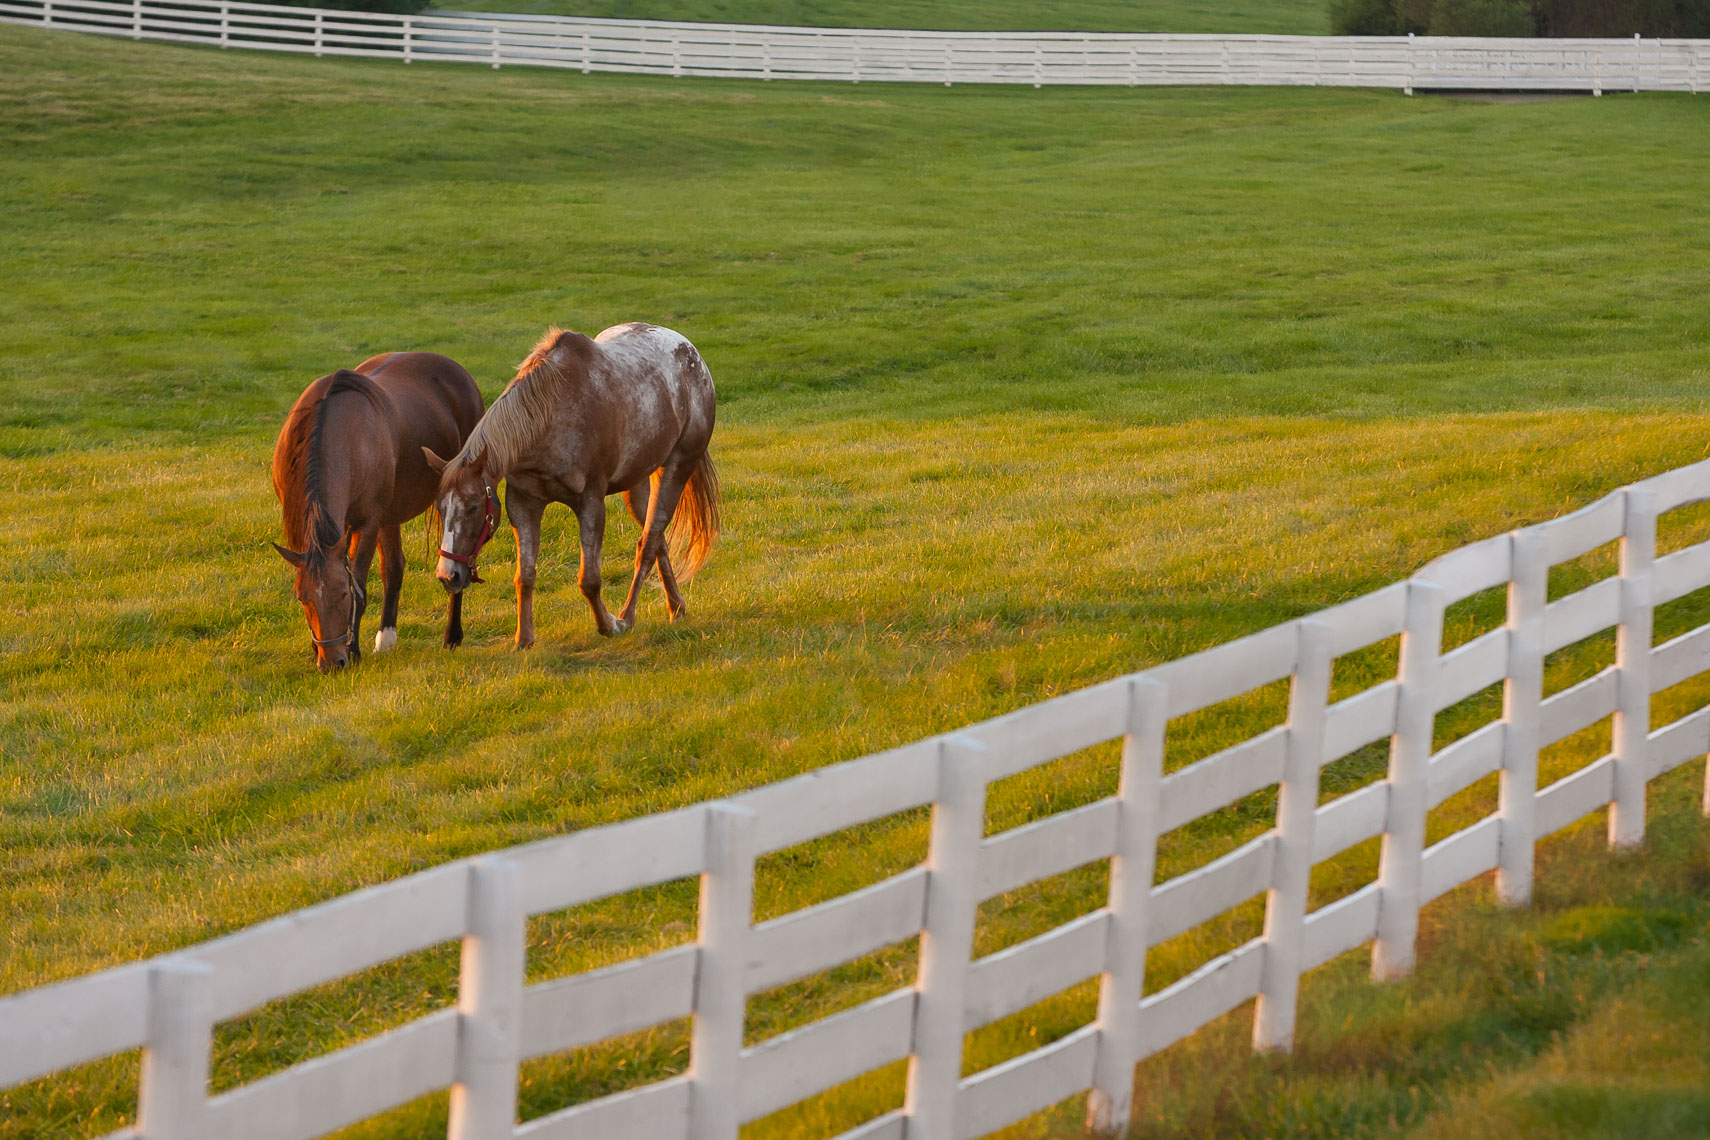 Horses_Grazing_in_the_Countryside_20060927_photo_by_Justin_Kase_Conder_0144-Edit_Tourism.JPG